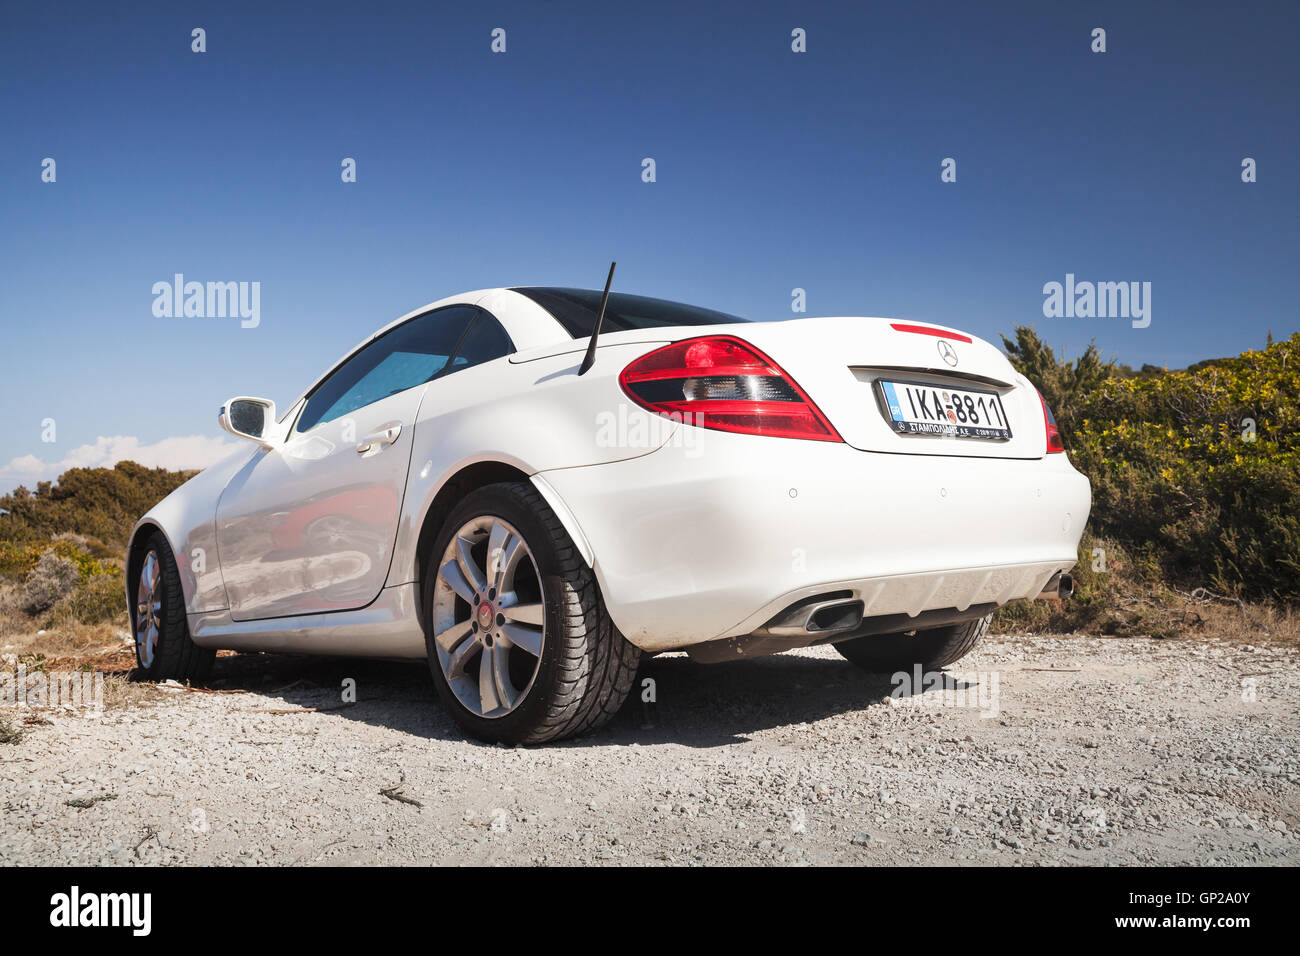 Zakynthos, Greece - August 20, 2016: White Mercedes-Benz SLK 200 pre-facelift car stands on the roadside in summer, closeup rear Stock Photo